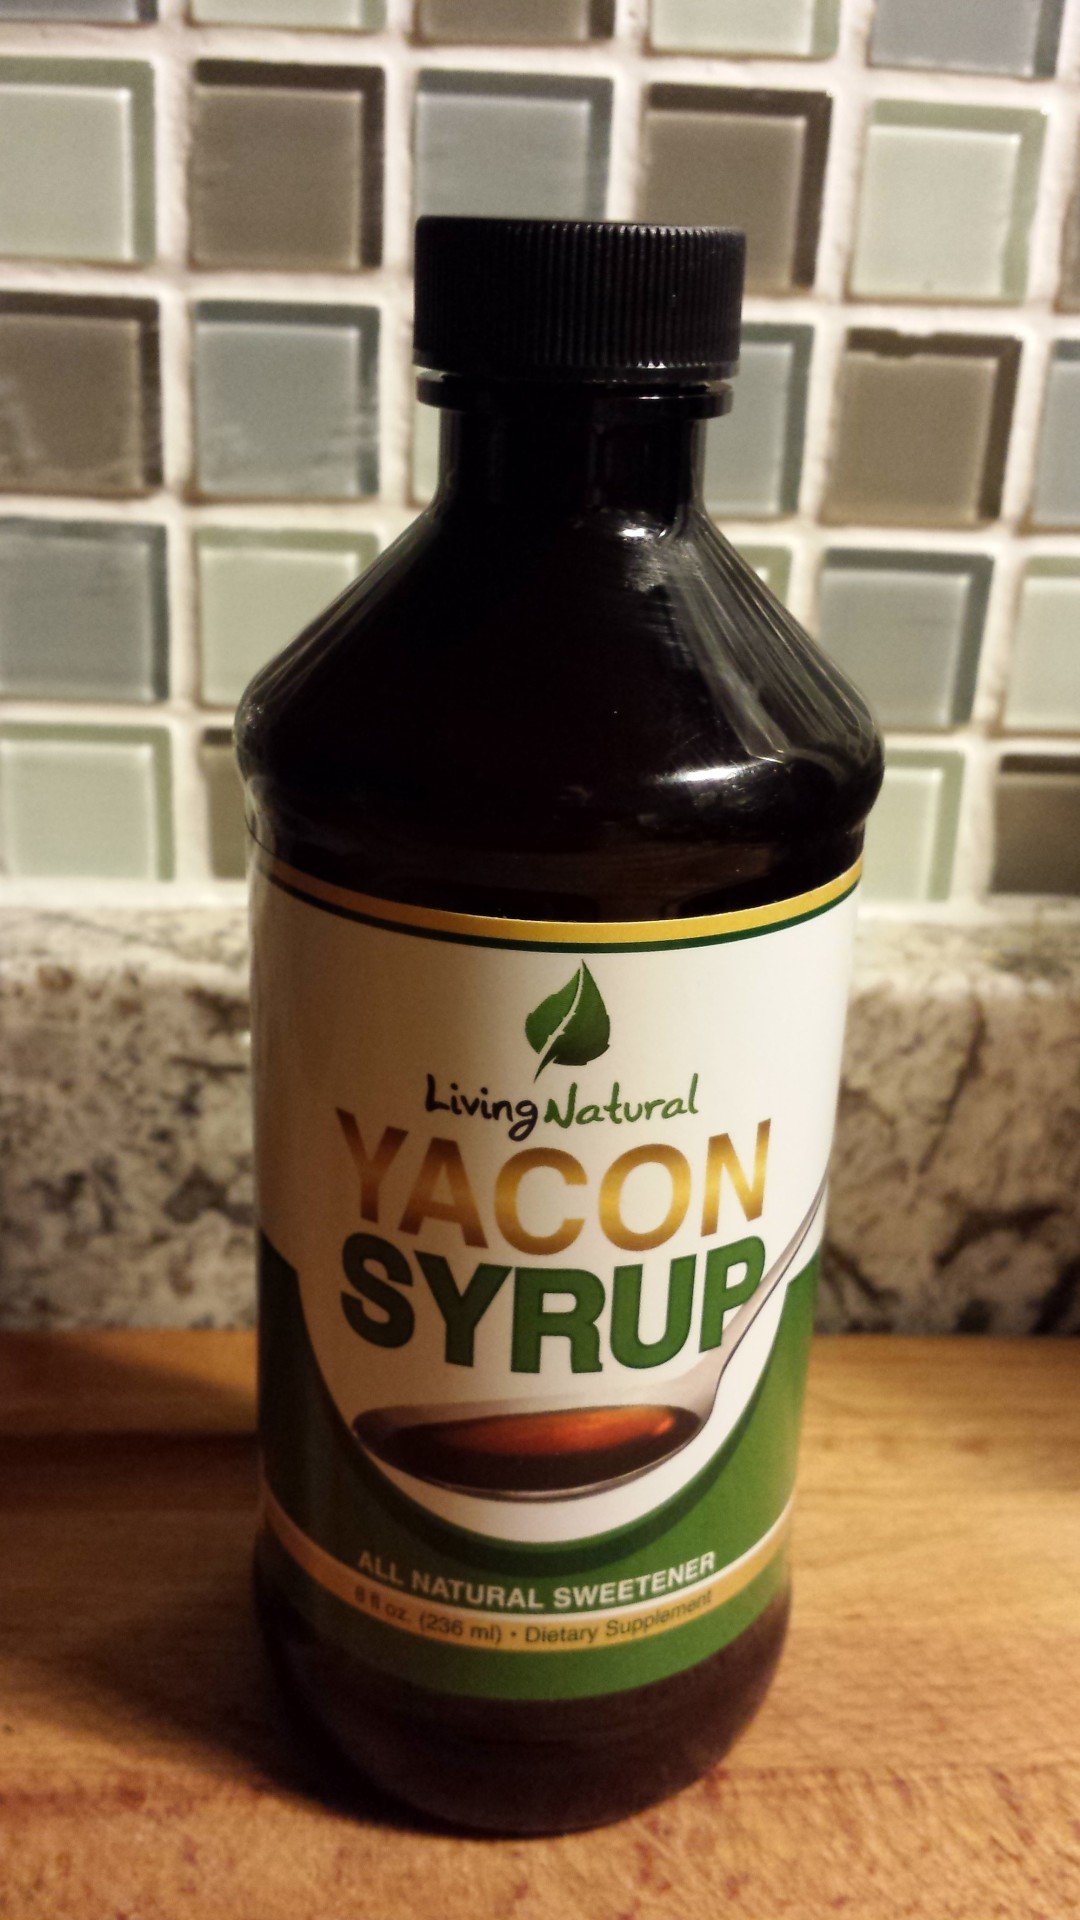 

I was so excited for the chance to review Living Natural&#8217;s Yacon Syrup. I searched high and low for this sugar substitute when my bf&#8217;s dad was first diagnosed diabetic. It is an all natural sweetener that tastes a bit like molasses with a hint of licorice&#8212;when mixed with things like coffee it is very subtle yet satisfying. Yacon is unique because the body doesn&#8217;t digest it, so you get the satisfaction of a sweet  flavor without the consequences. I&#8217;m using it for my candida cleanse diet which bans sugar. I&#8217;ve used it as a sweetener for my coffee and in hot tonics and it does the trick! Check it out! 
